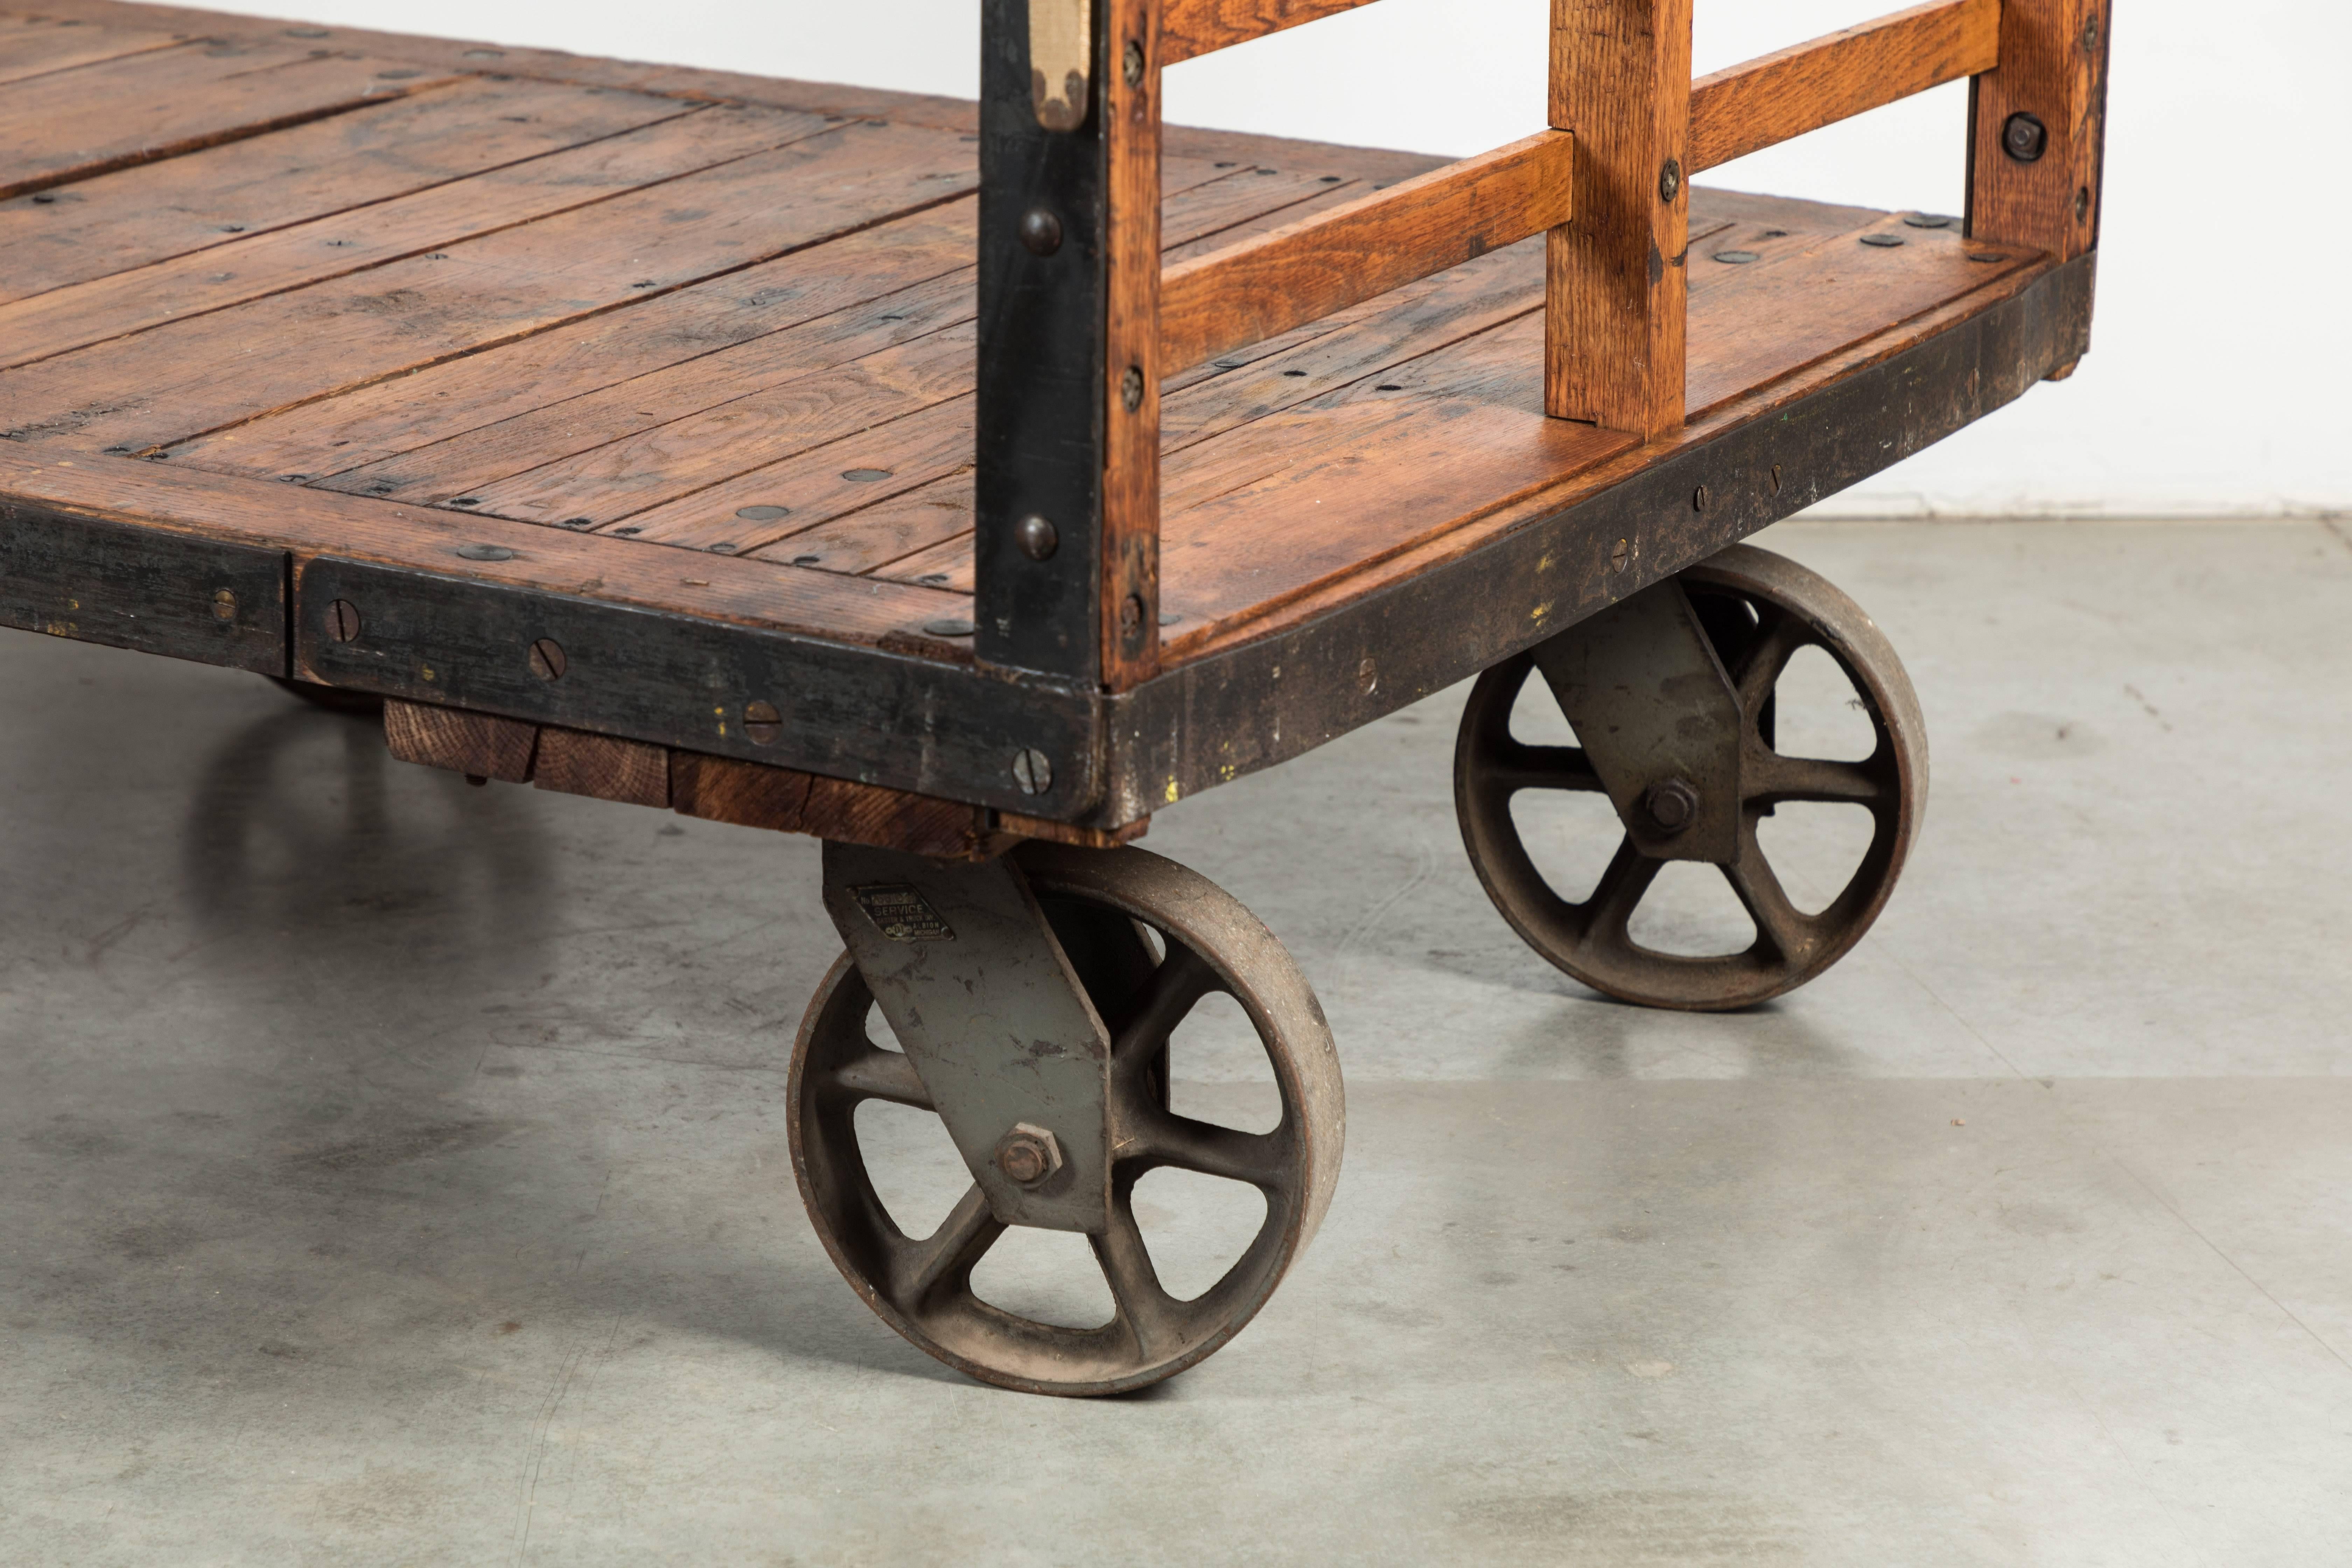 Steampunk Late 19th Century Midwestern Train Depot Luggage Cart